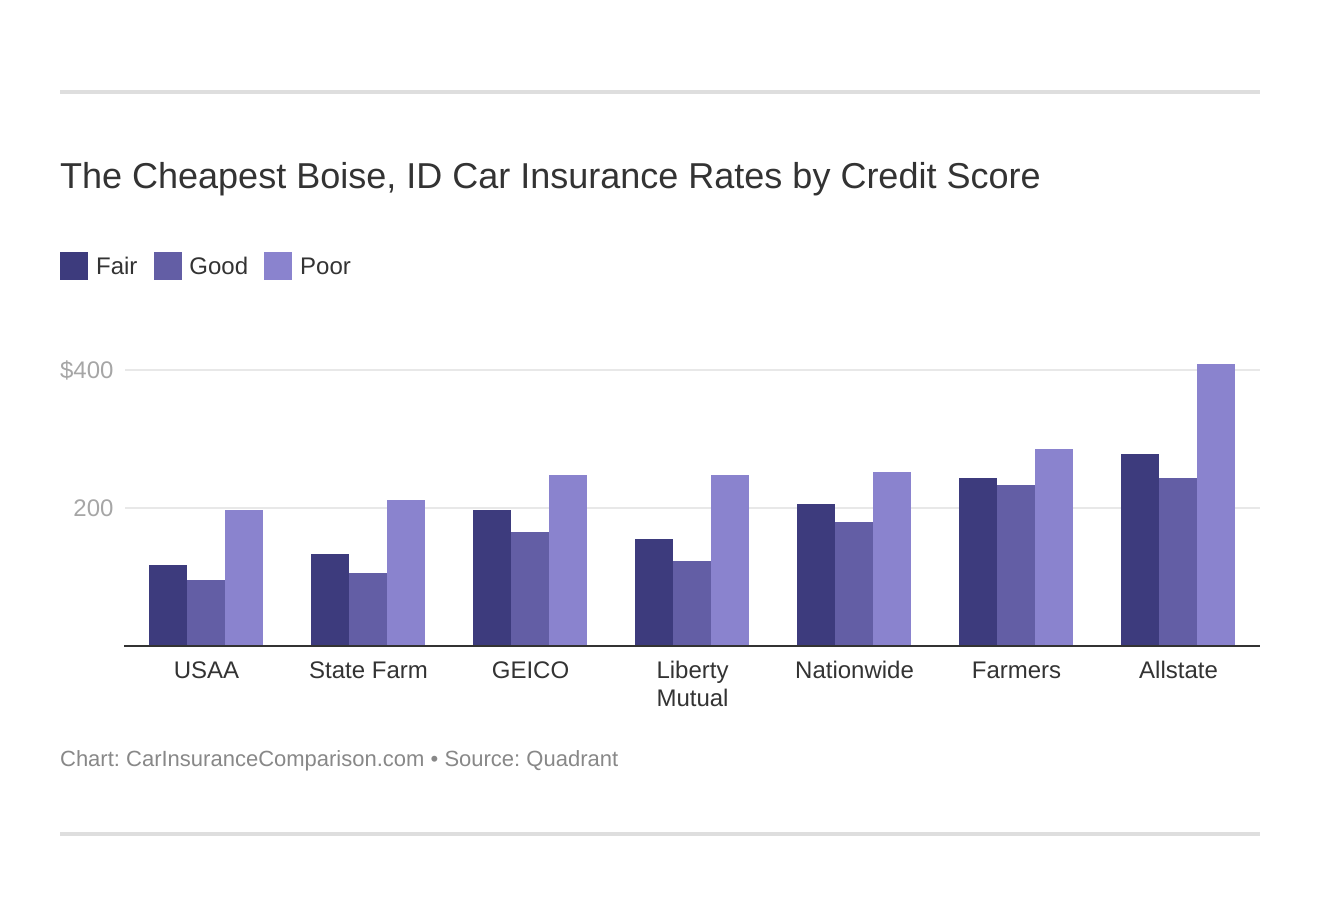 The Cheapest Boise, ID Car Insurance Rates by Credit Score